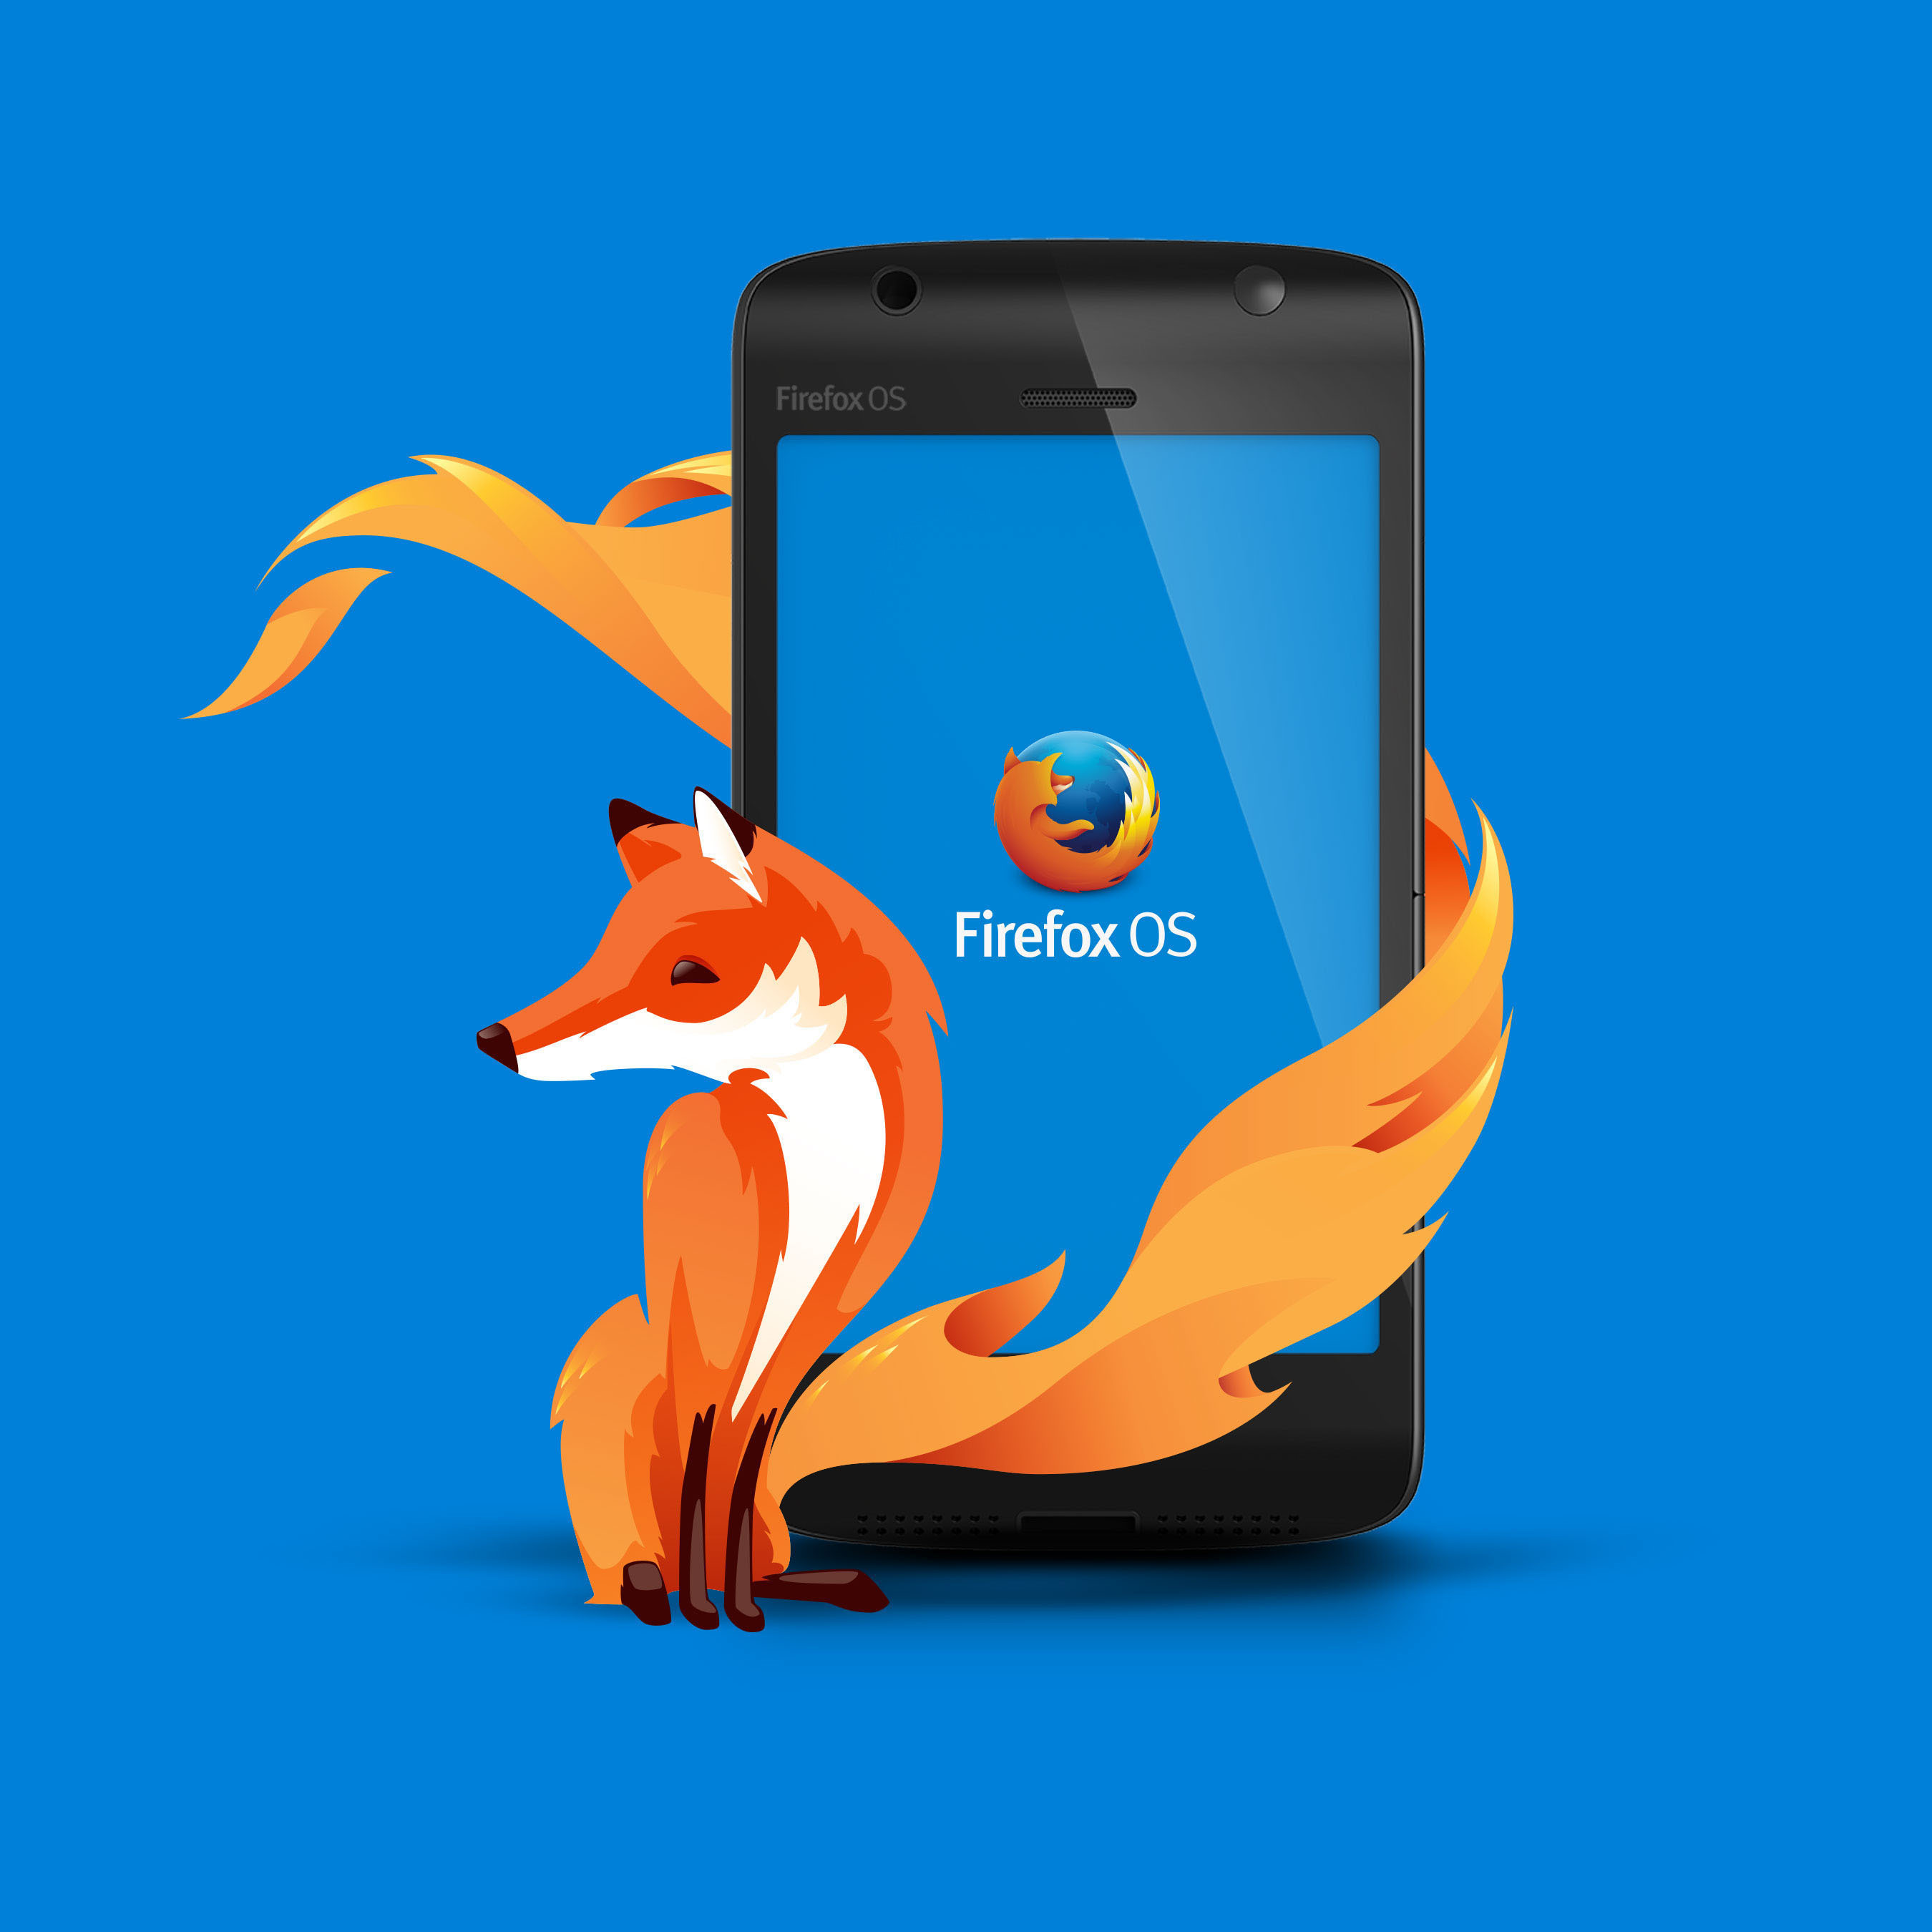 Firefox OS momentum continues with an expanding ecosystem of partners, new market rollouts and portfolio options to customize and scale. (PRNewsFoto/Mozilla) (PRNewsFoto/MOZILLA)